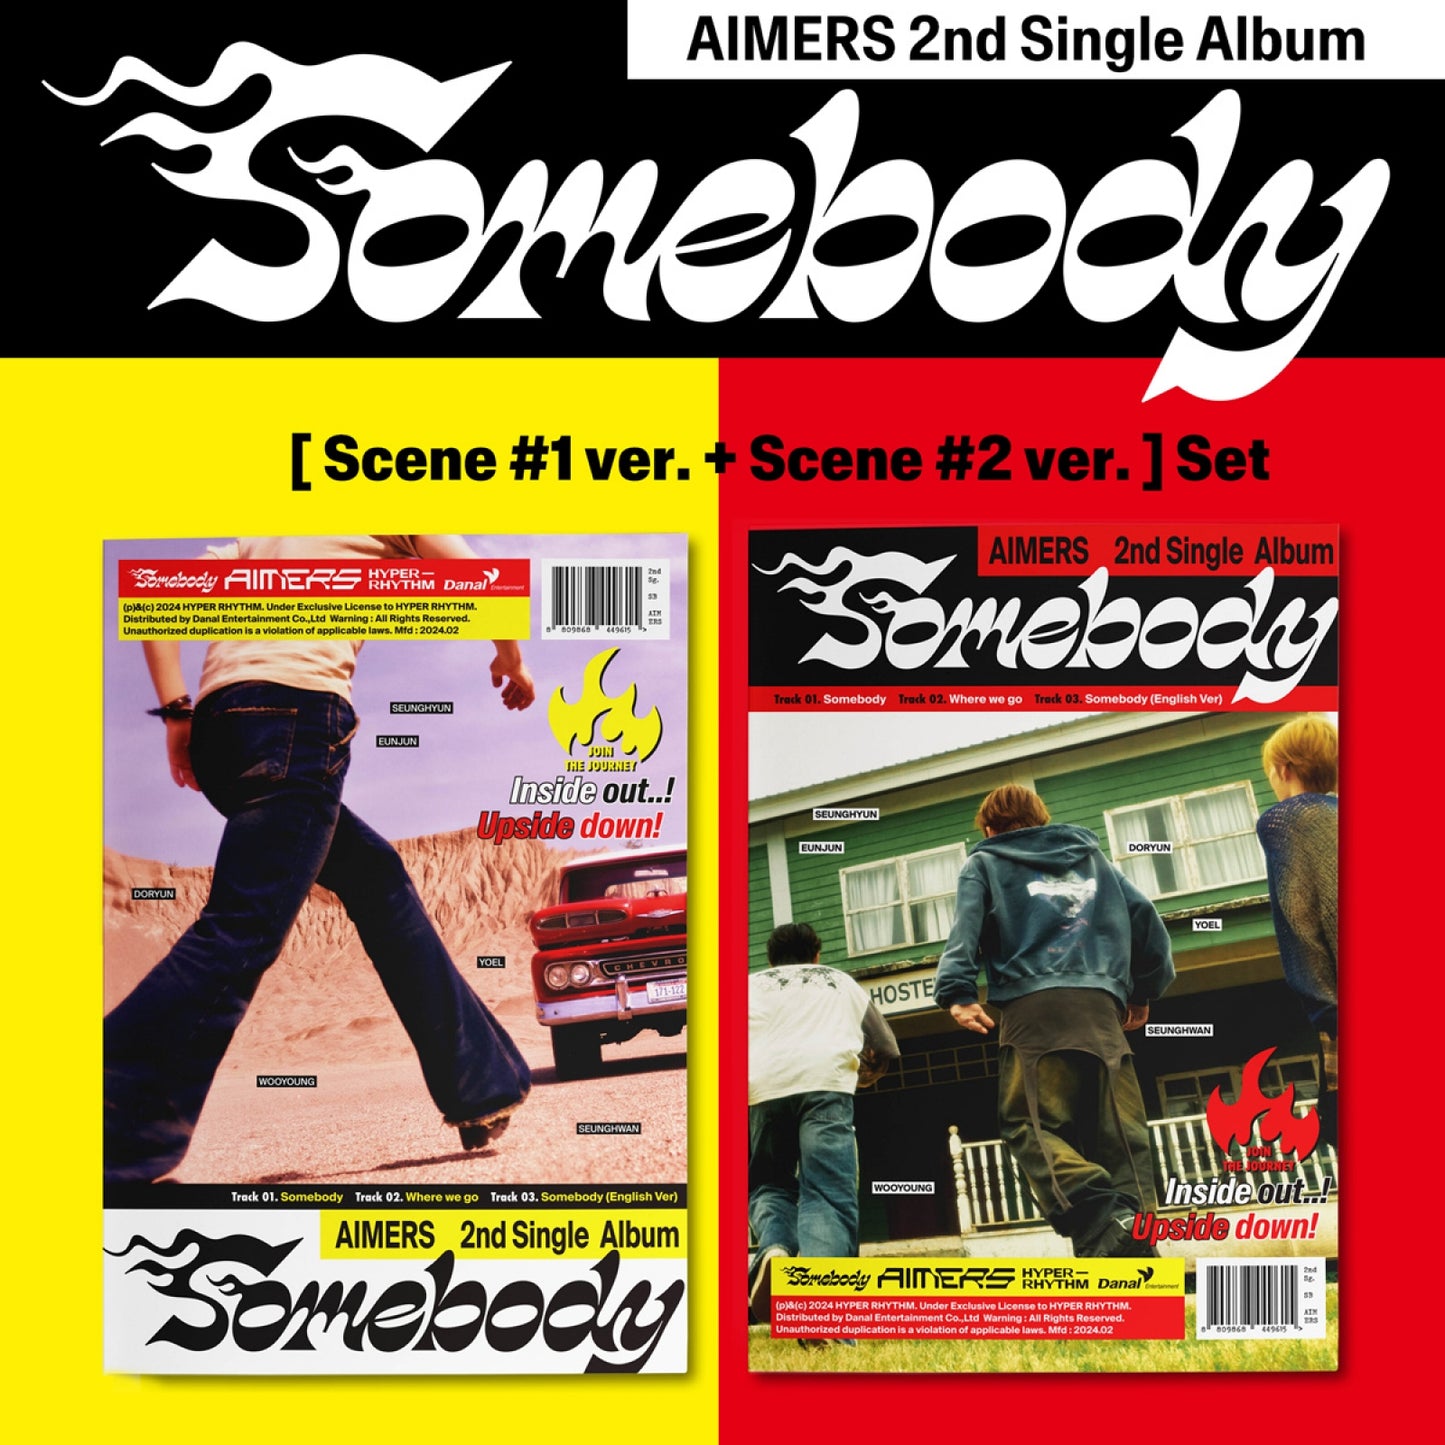 AIMERS 2nd Single Album : Somebody